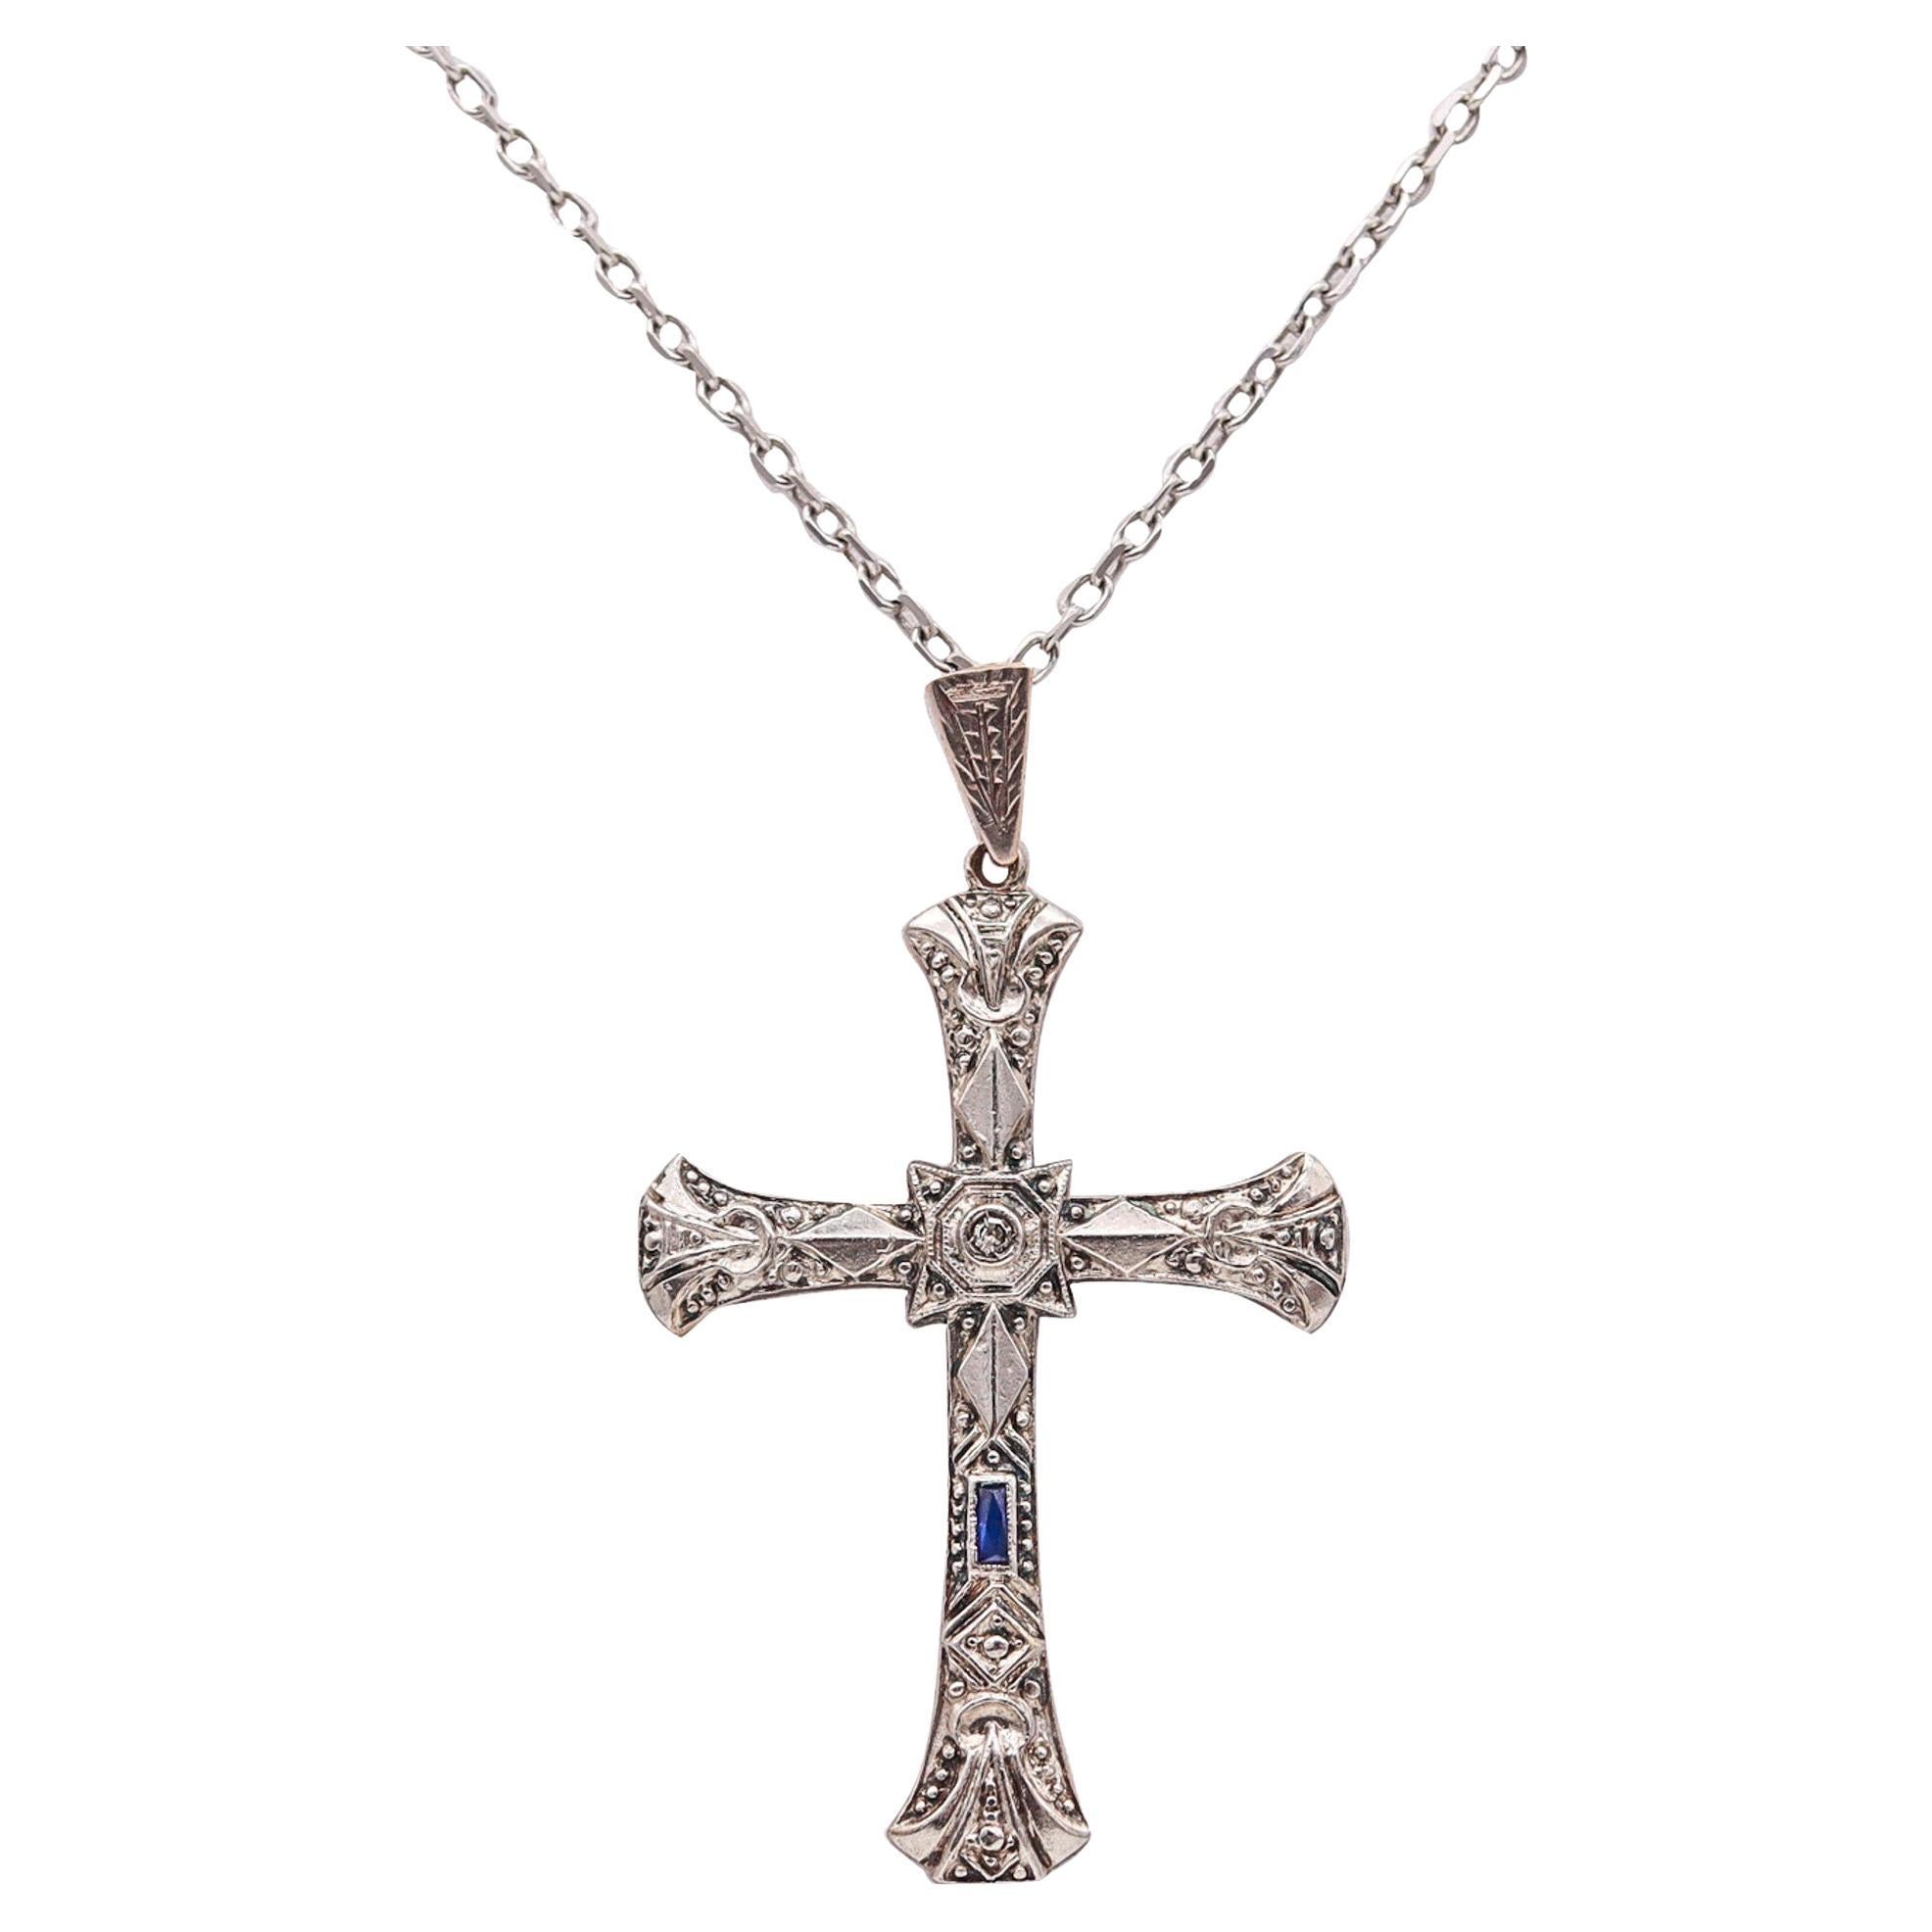 Edwardian 1905 Belle Epoque Cross In 14Kt Gold With Diamond And Sapphire